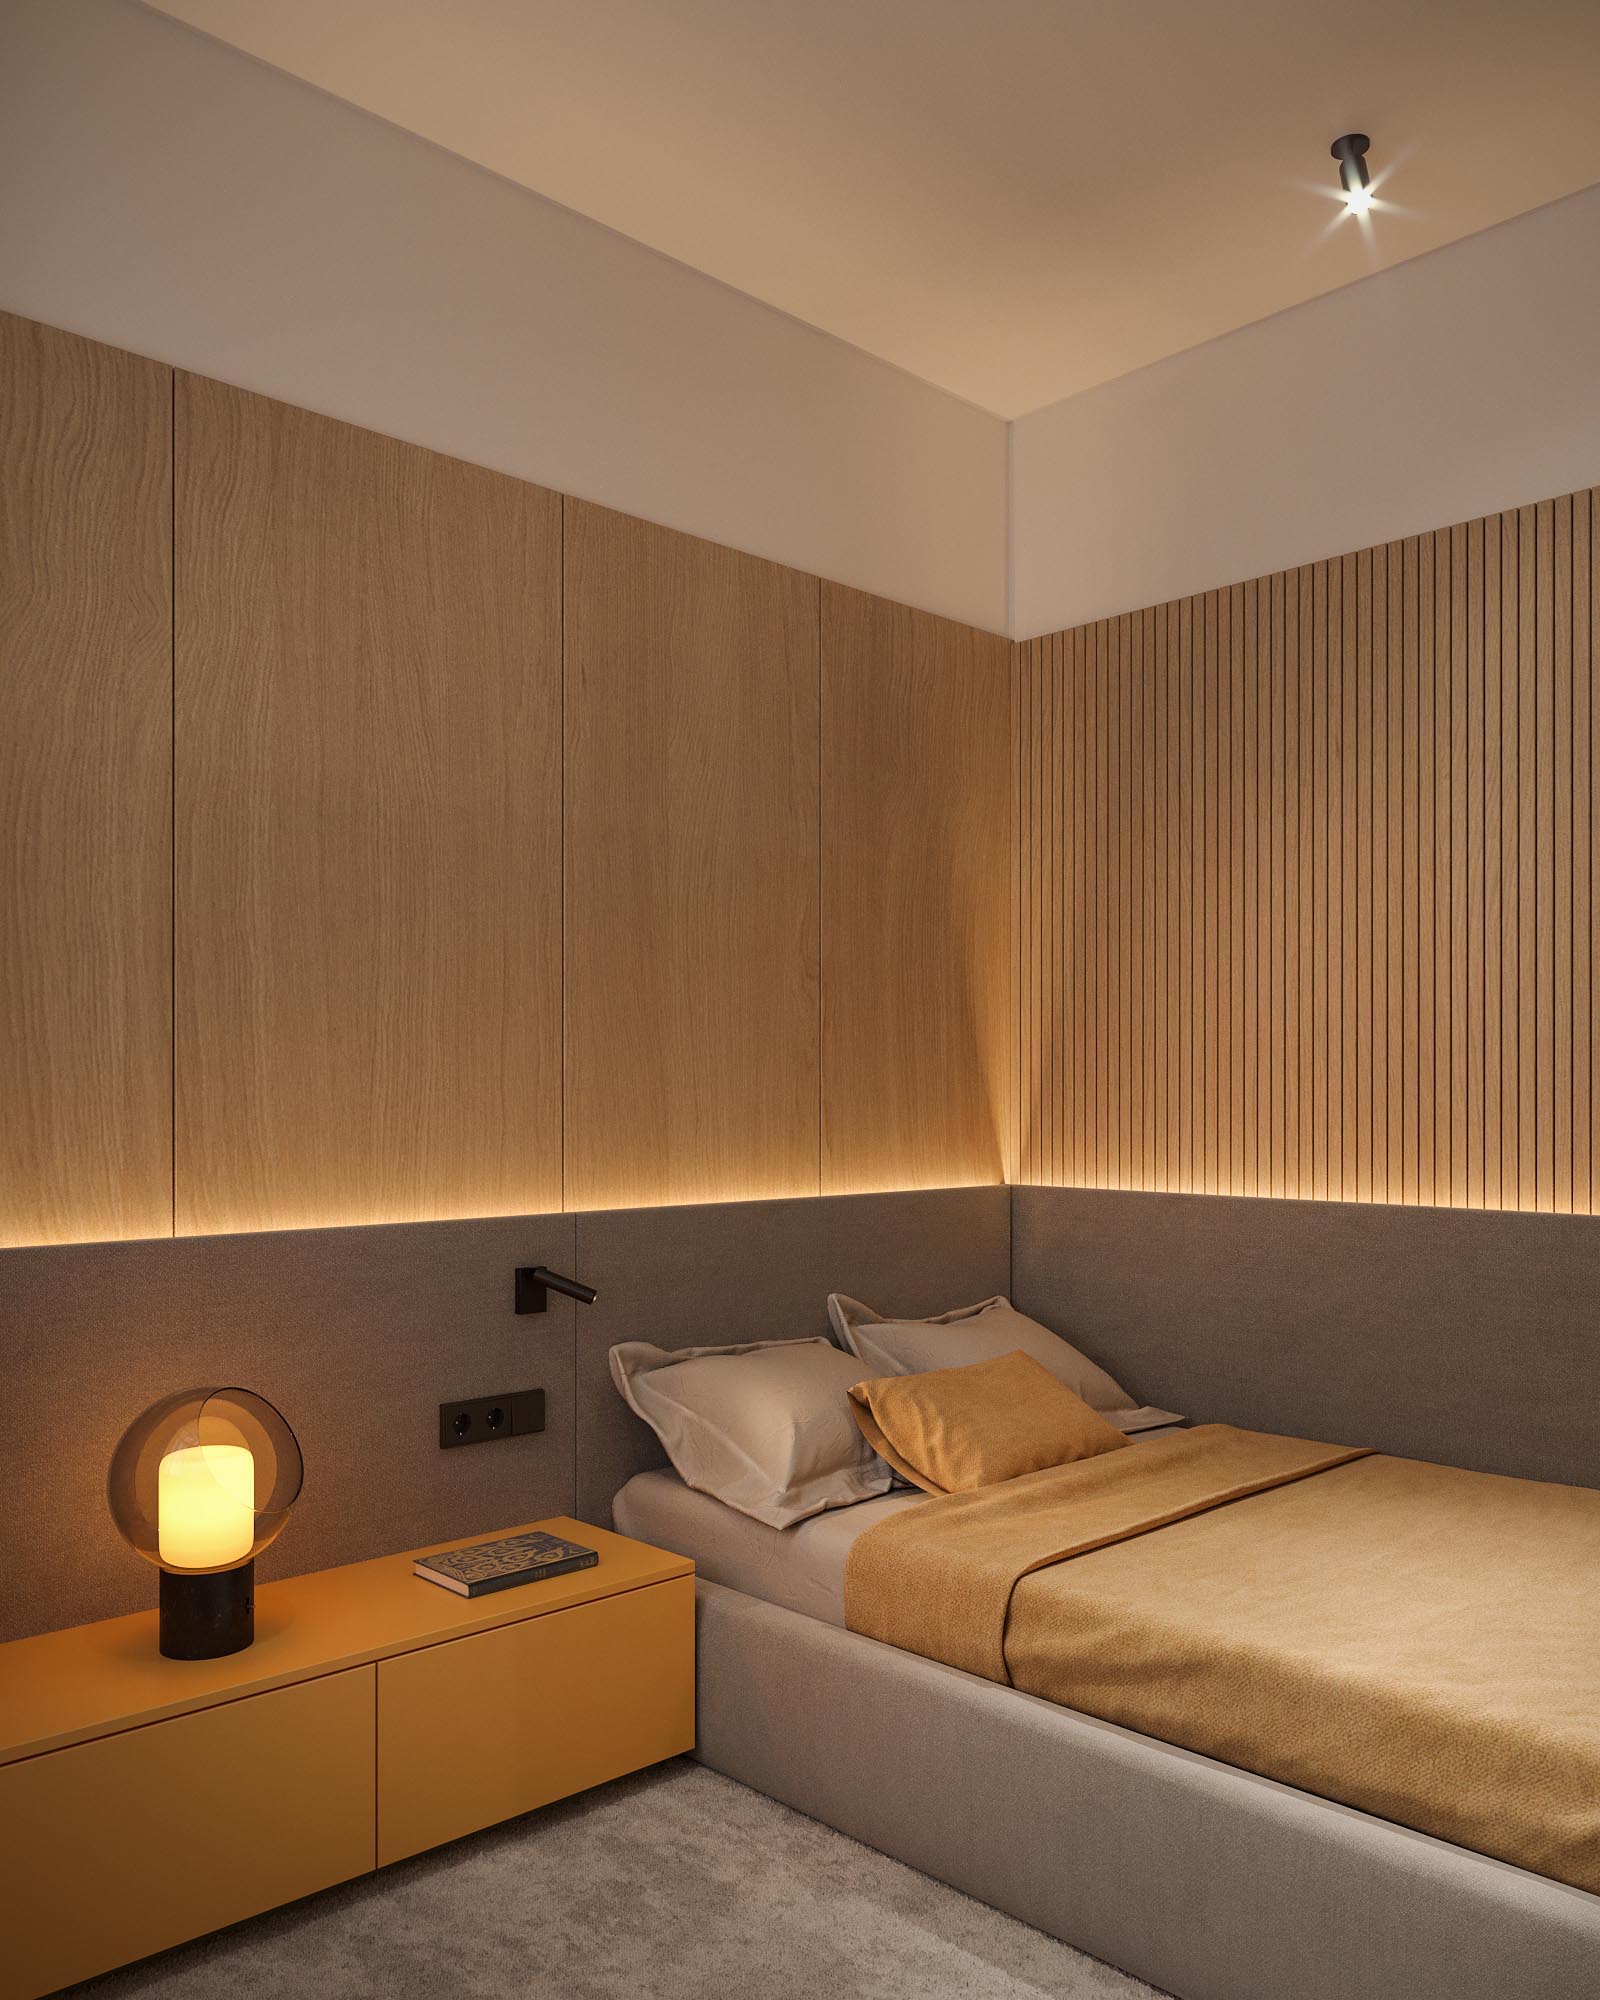 Bedroom Lighting Ideas - A modern bedroom with a headboard that wraps around the corner of the room and showcases hidden LED lighting.